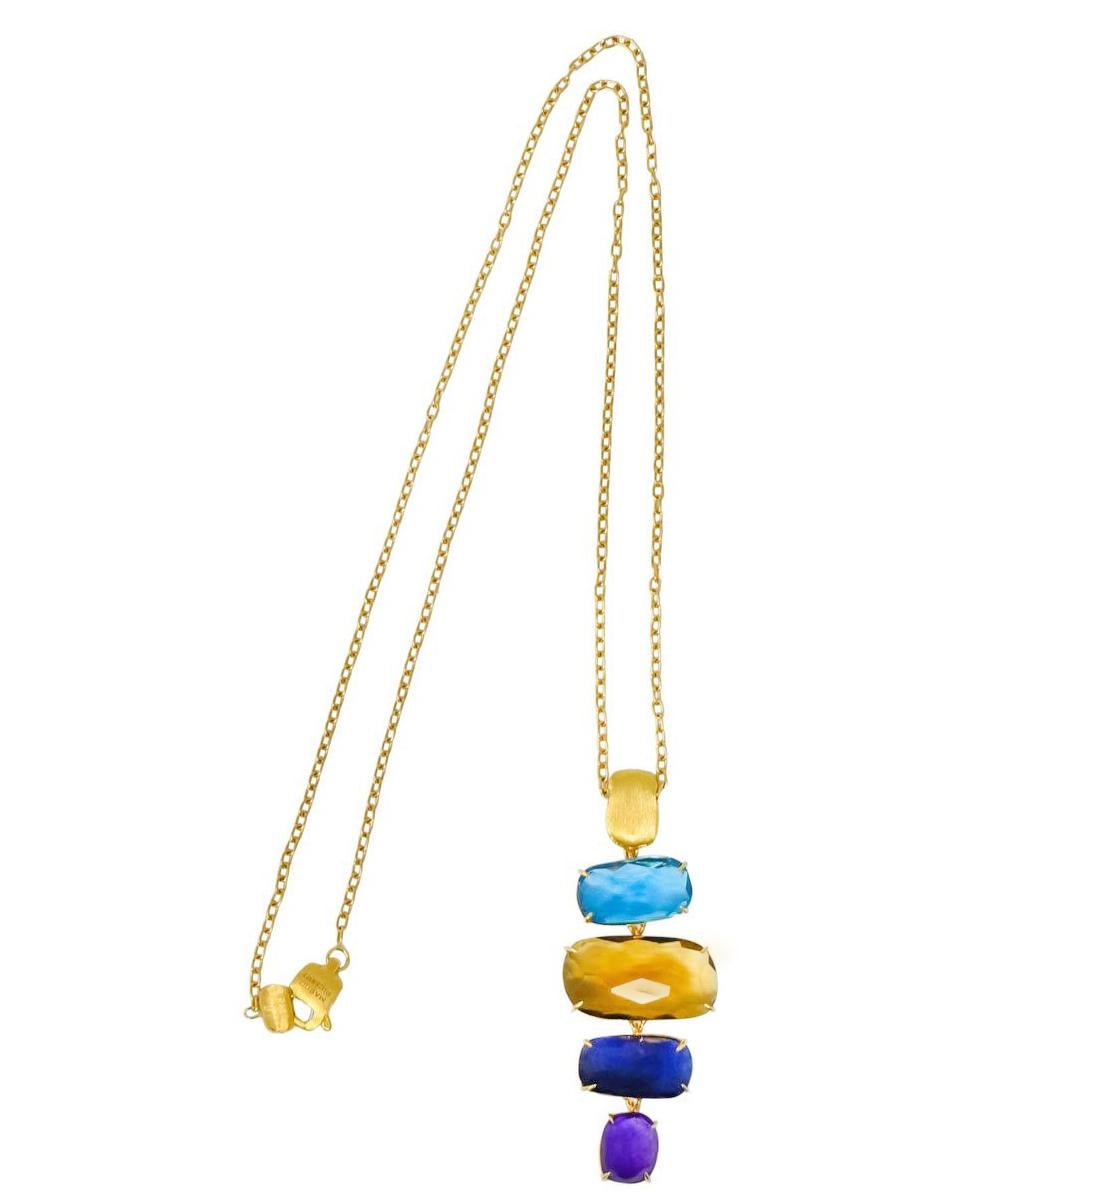 Pendant designed as checkerboard cut gemstones with brushed gold bale

Prong set with iolite, blue topaz, citrine, and dyed amethyst

Completed by cable chain with boxy, brushed, spring ring clasp

Fully signed Marco Bicego

Stamped 'made in Italy'